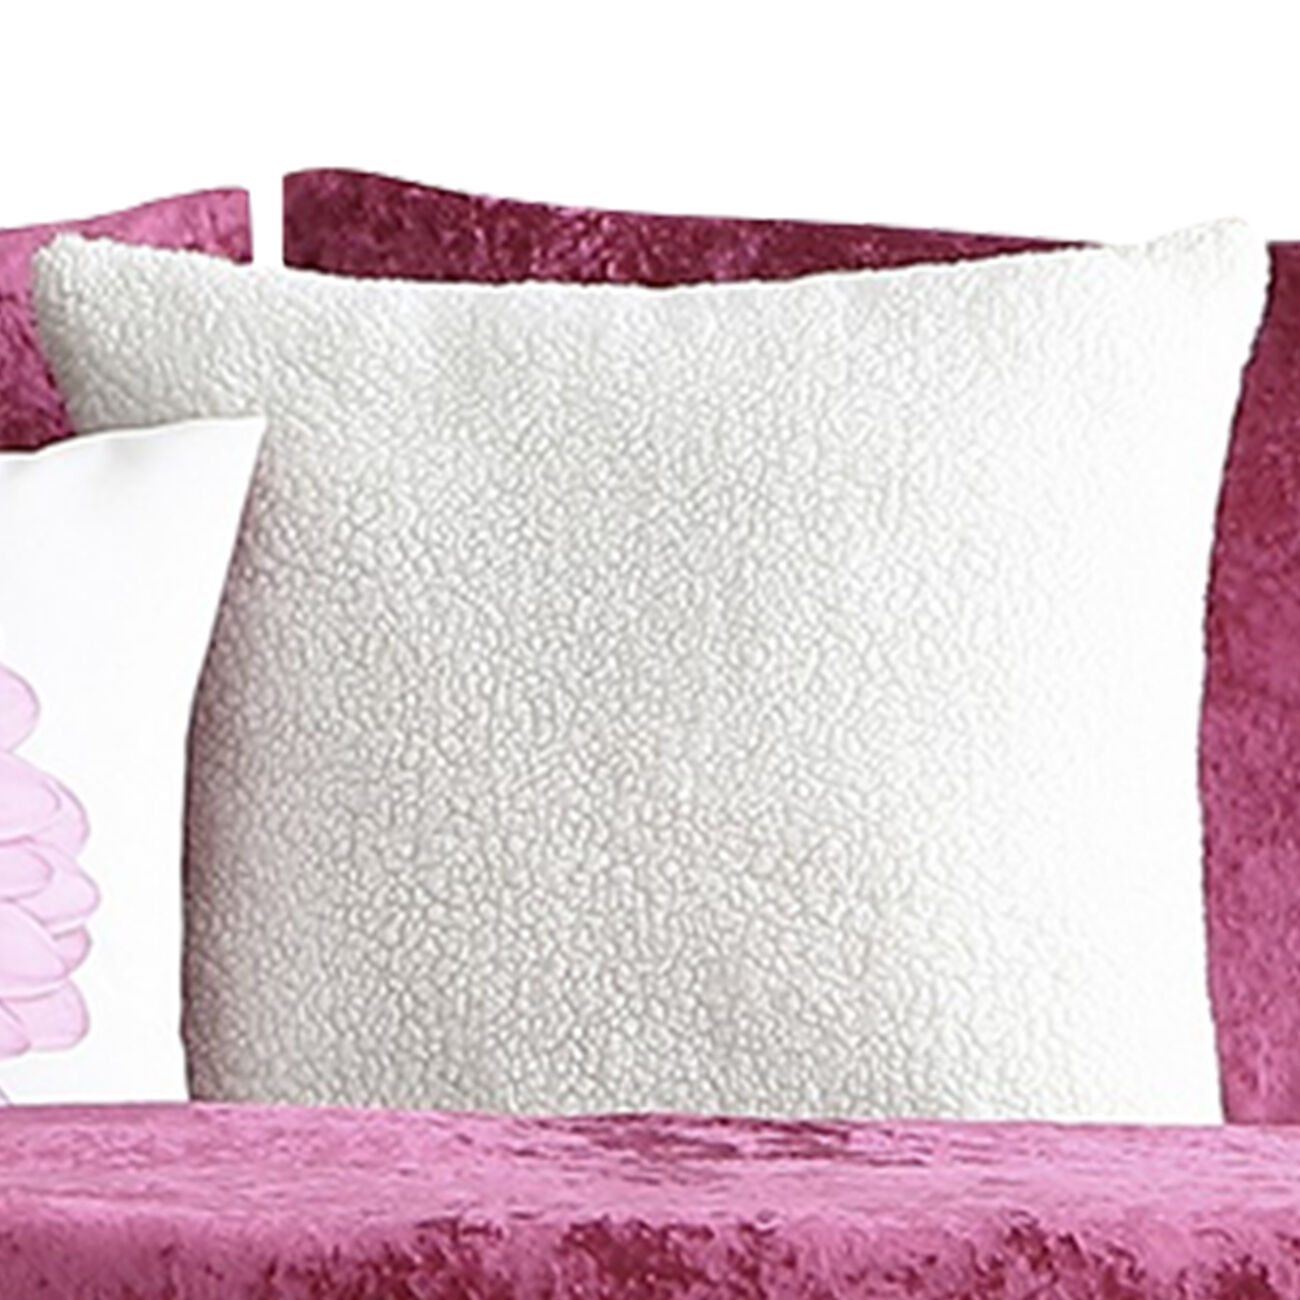 5 Piece Velvet Full Size Comforter Set with Accent Pillows, Pink